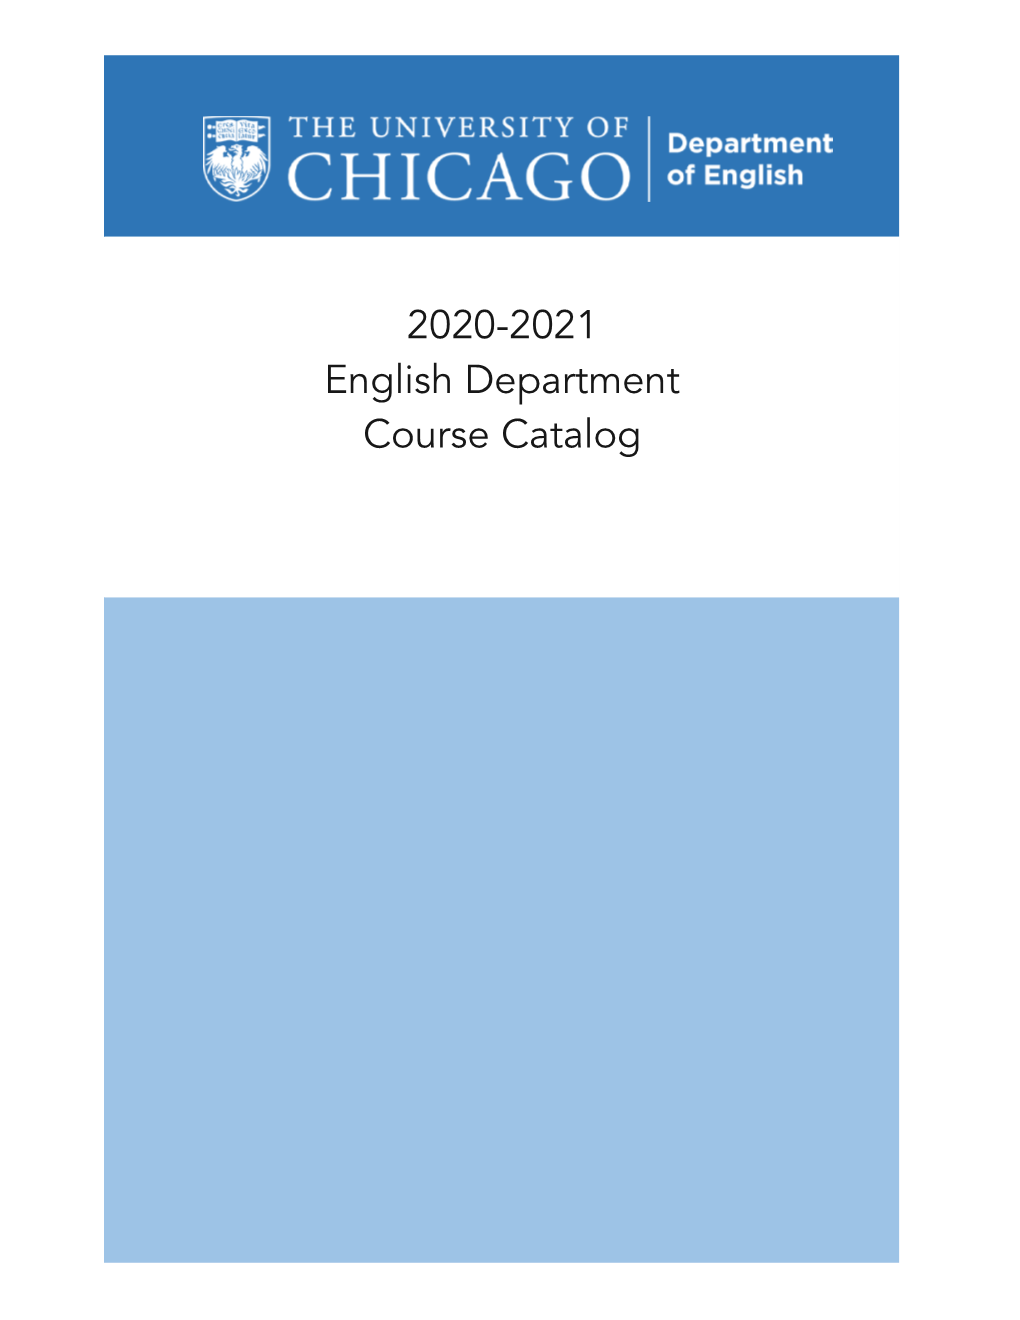 English Department Course Catalog 2020-2021 (Final)Upd 2-17